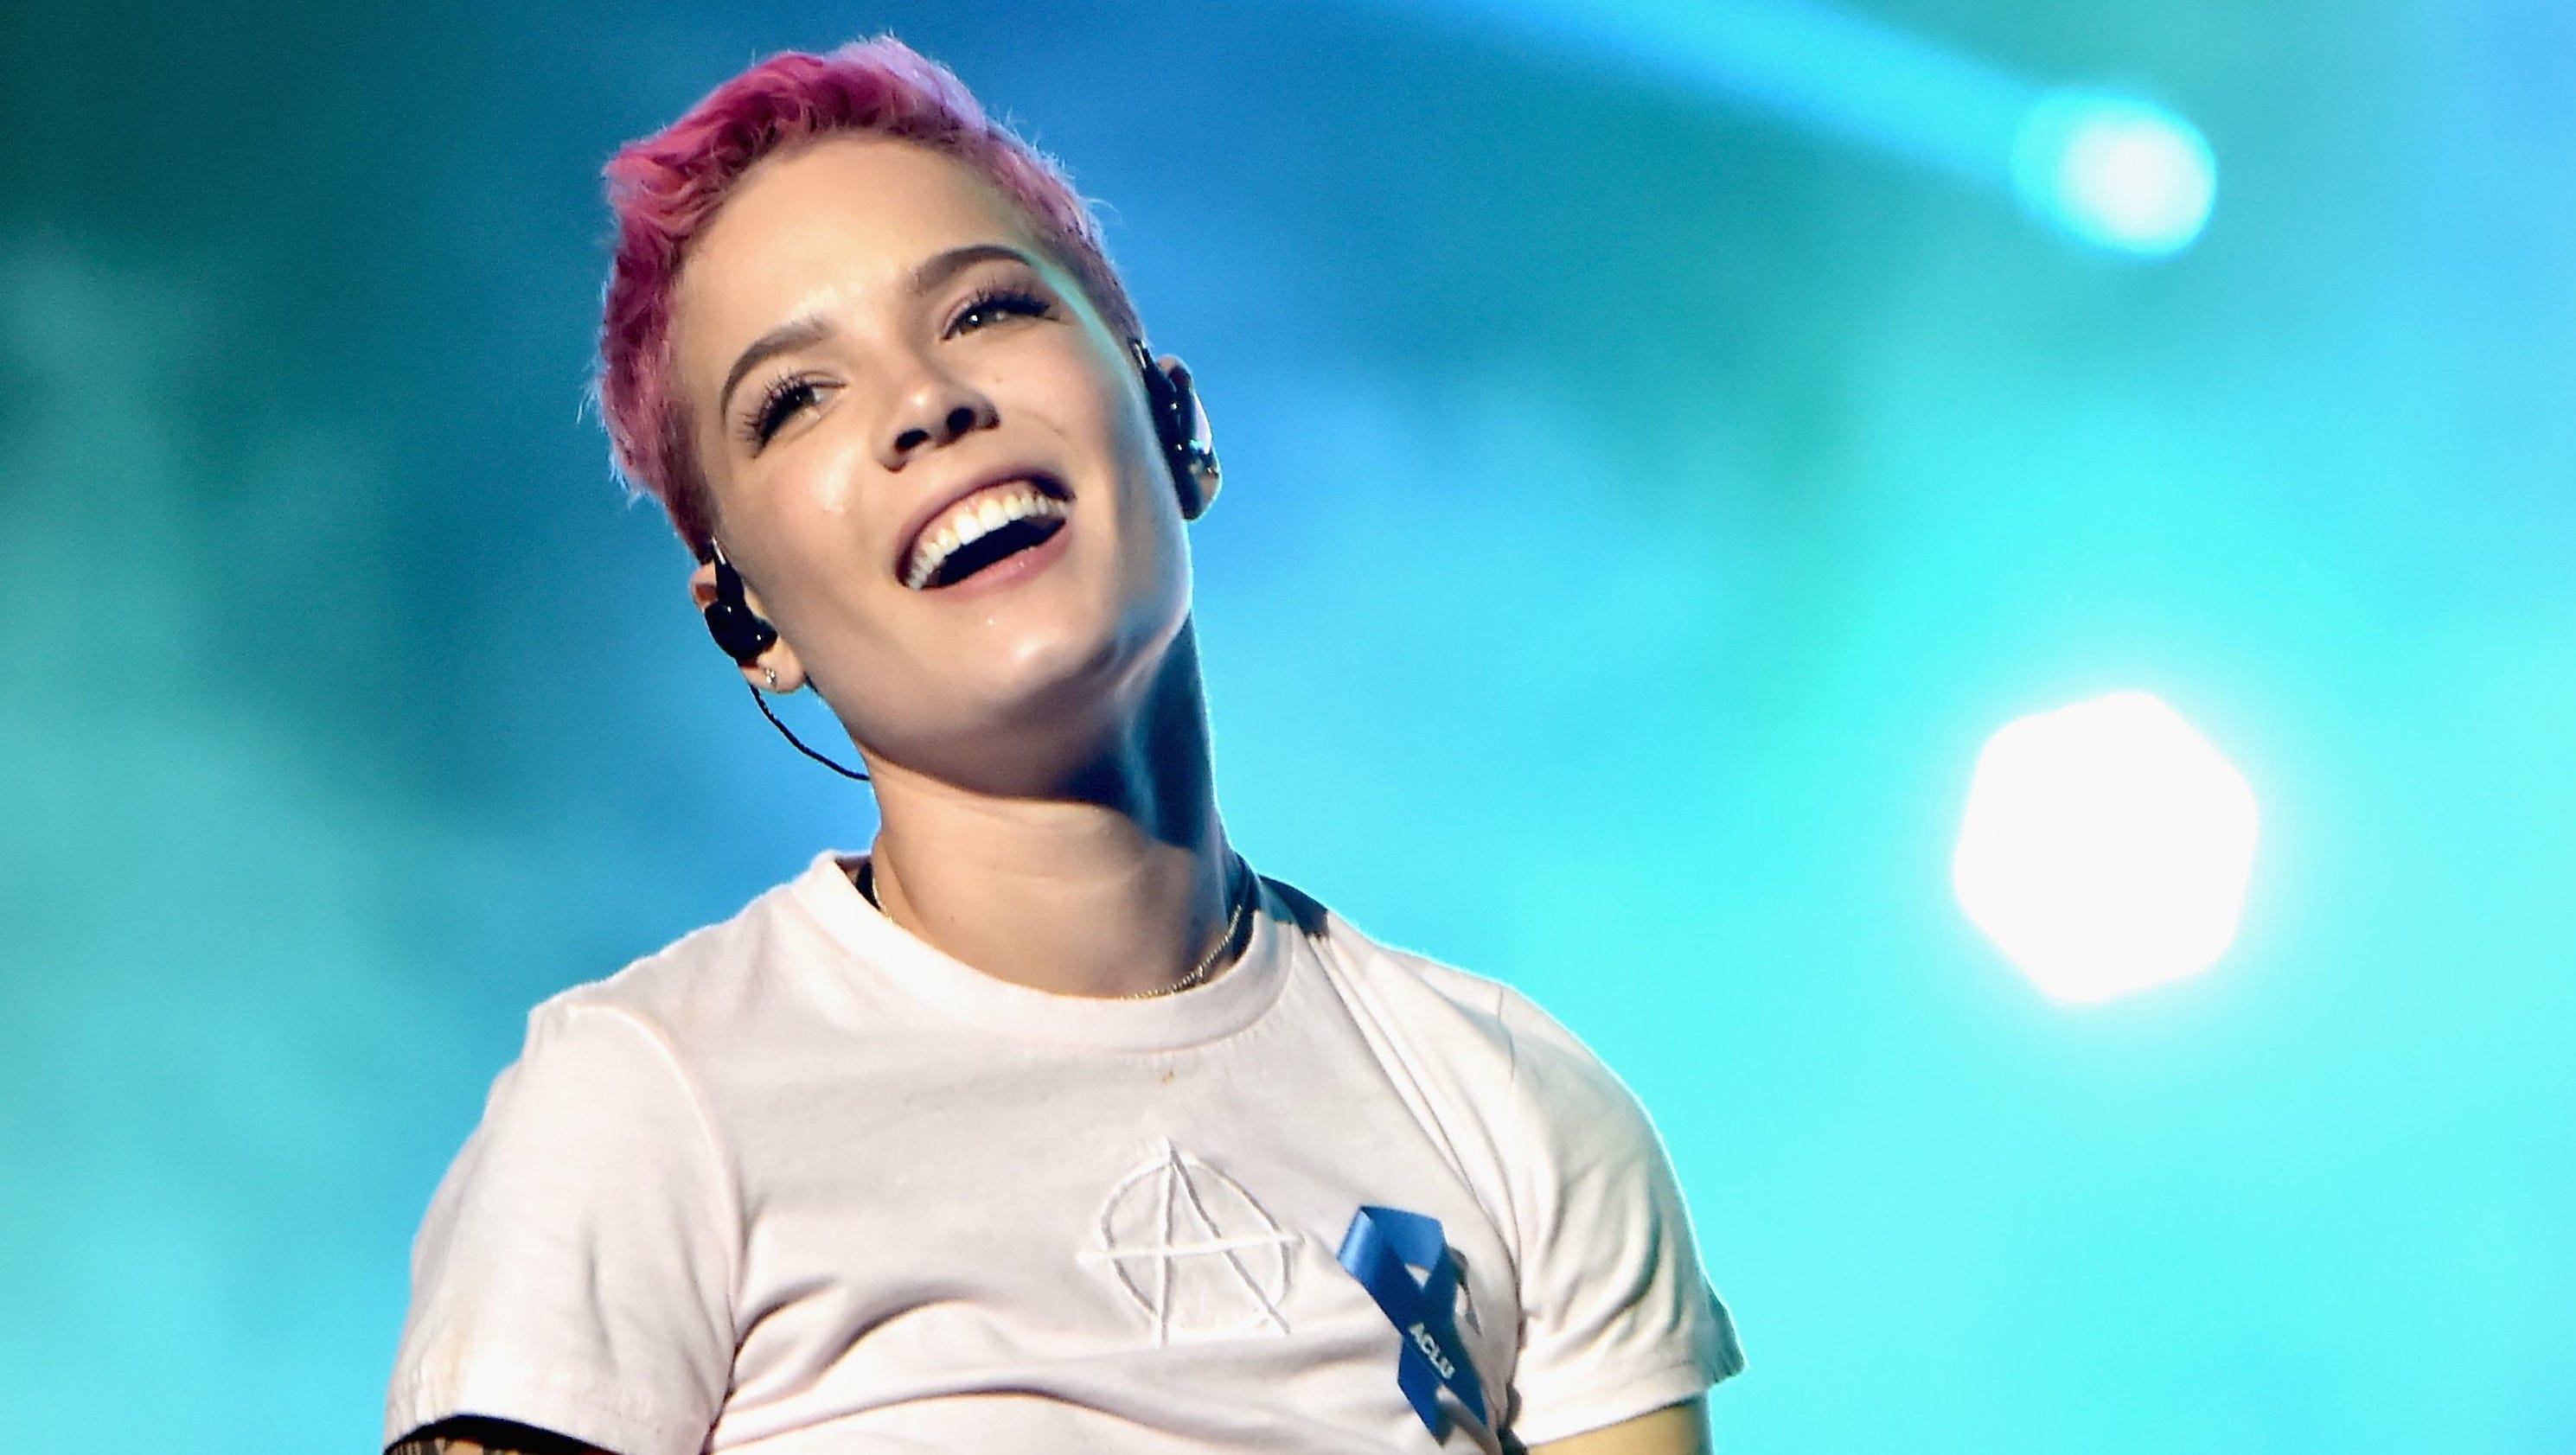 Halsey is a criminal on the run in her 'Bad At Love' music video